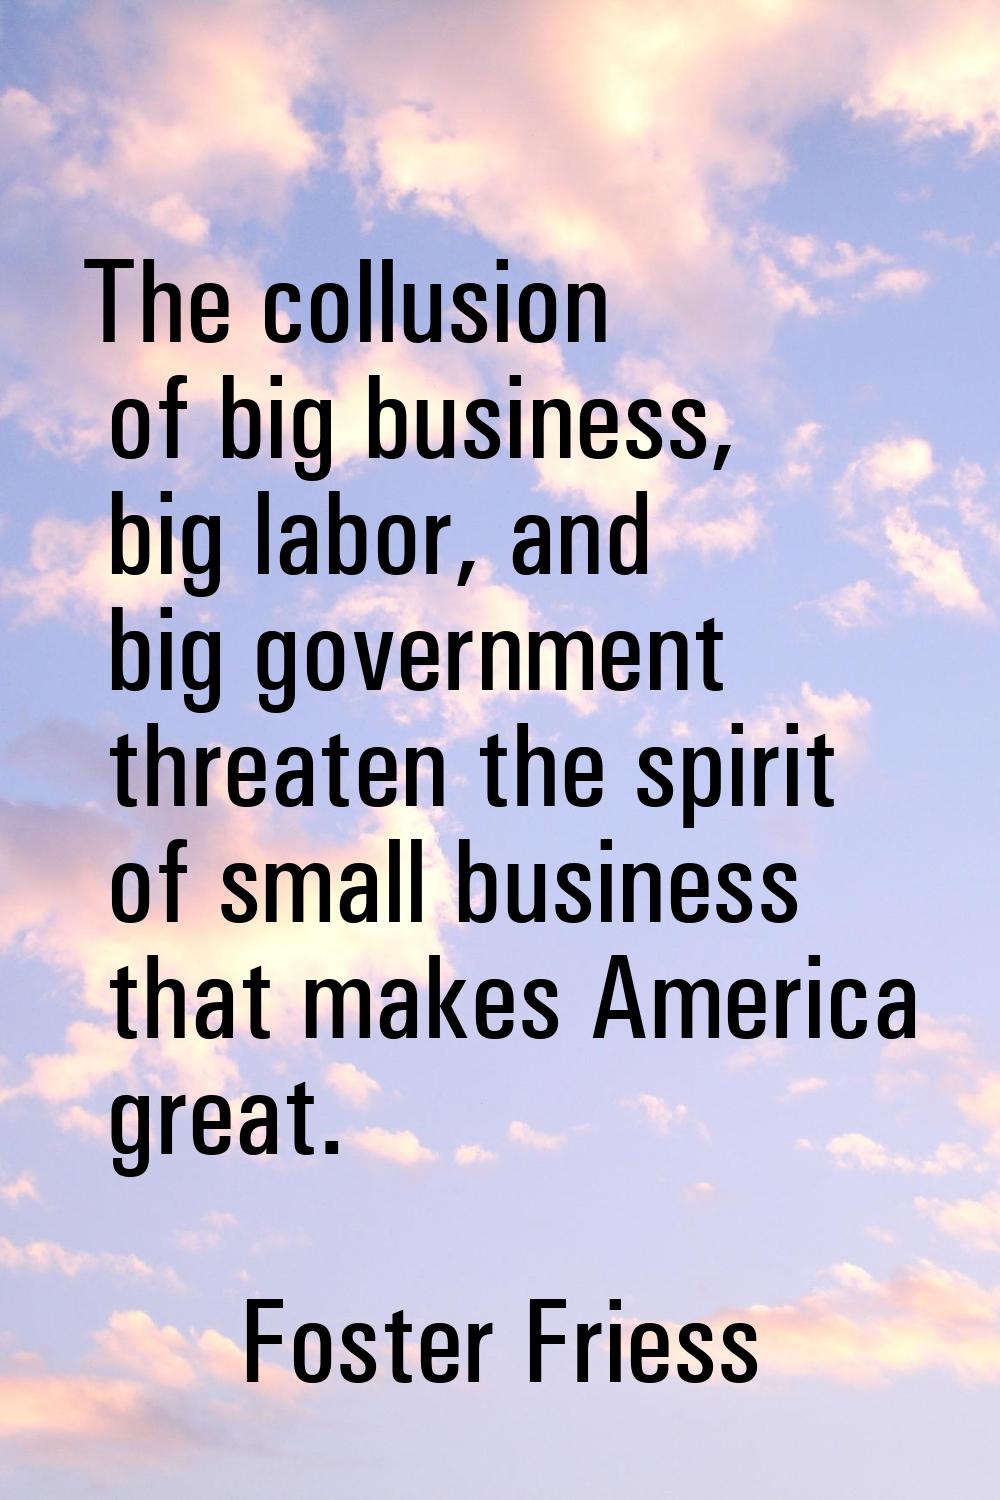 The collusion of big business, big labor, and big government threaten the spirit of small business 